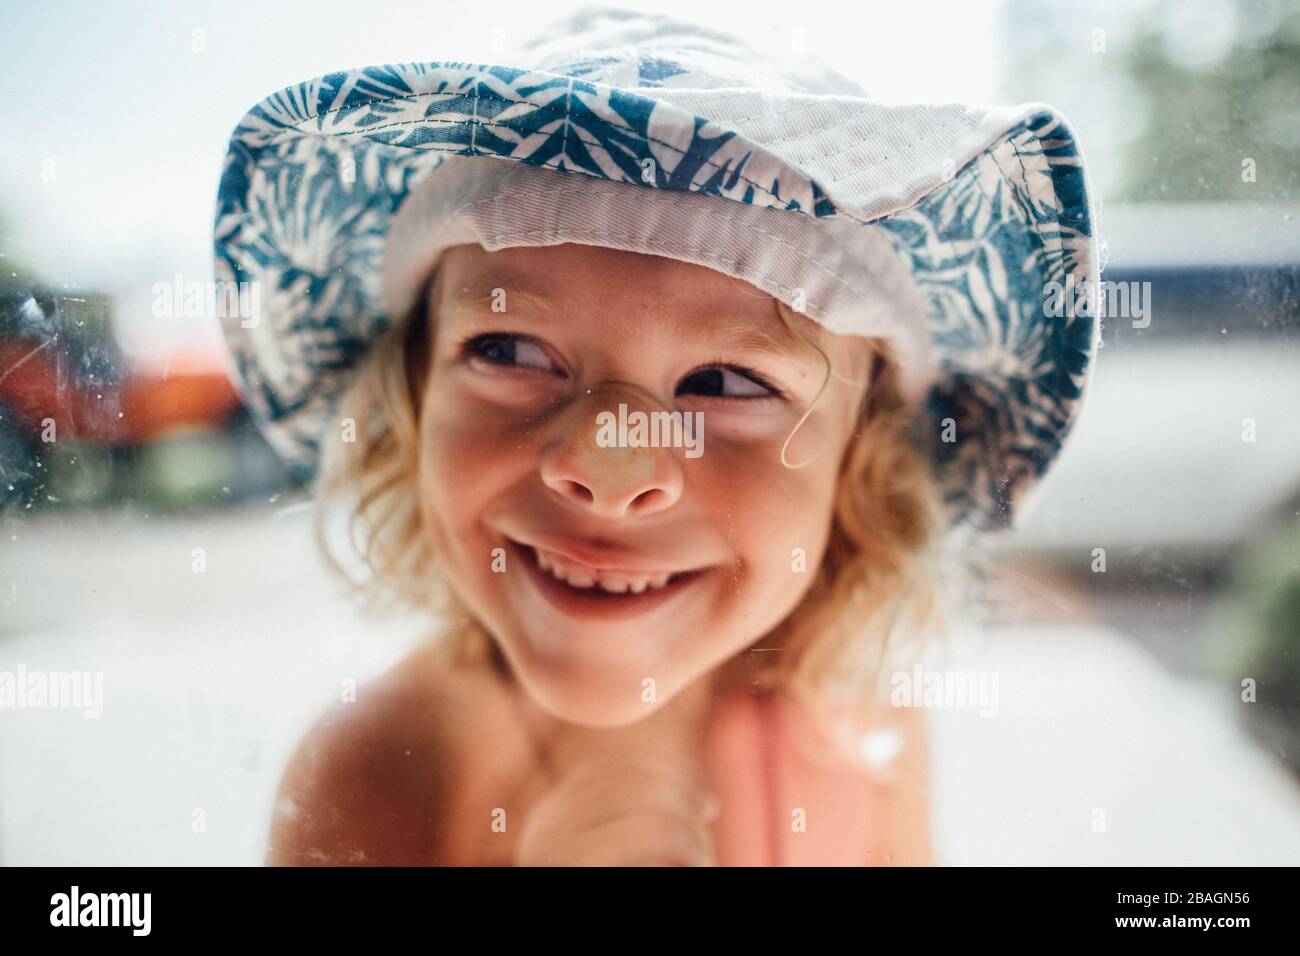 Little boy with smooshed face in window wearing bucket hat Stock Photo